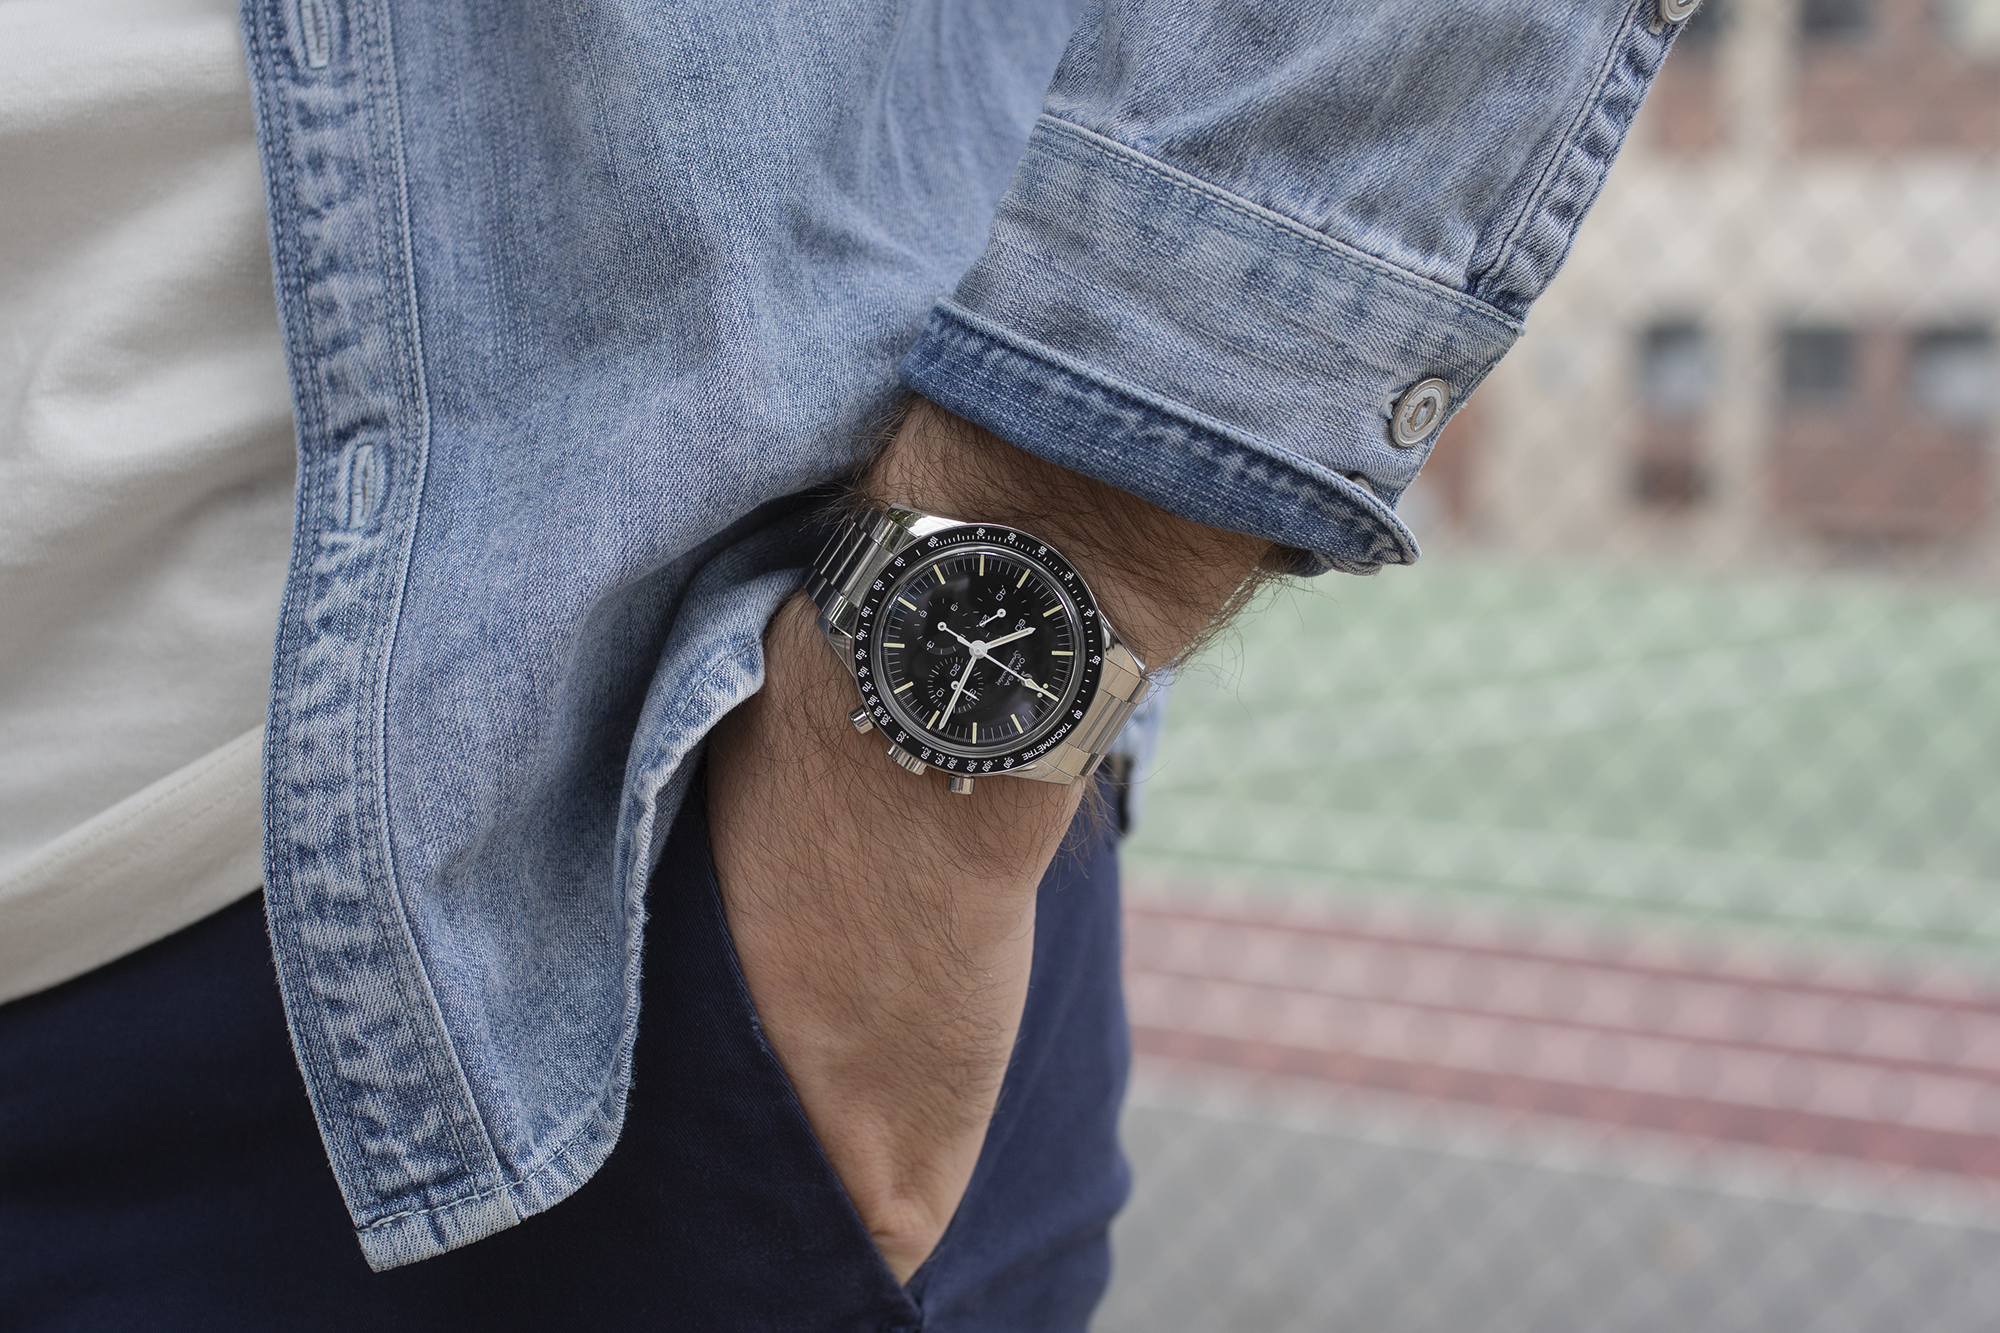 What Makes The Omega Speedmaster Calibre 321 So Special?